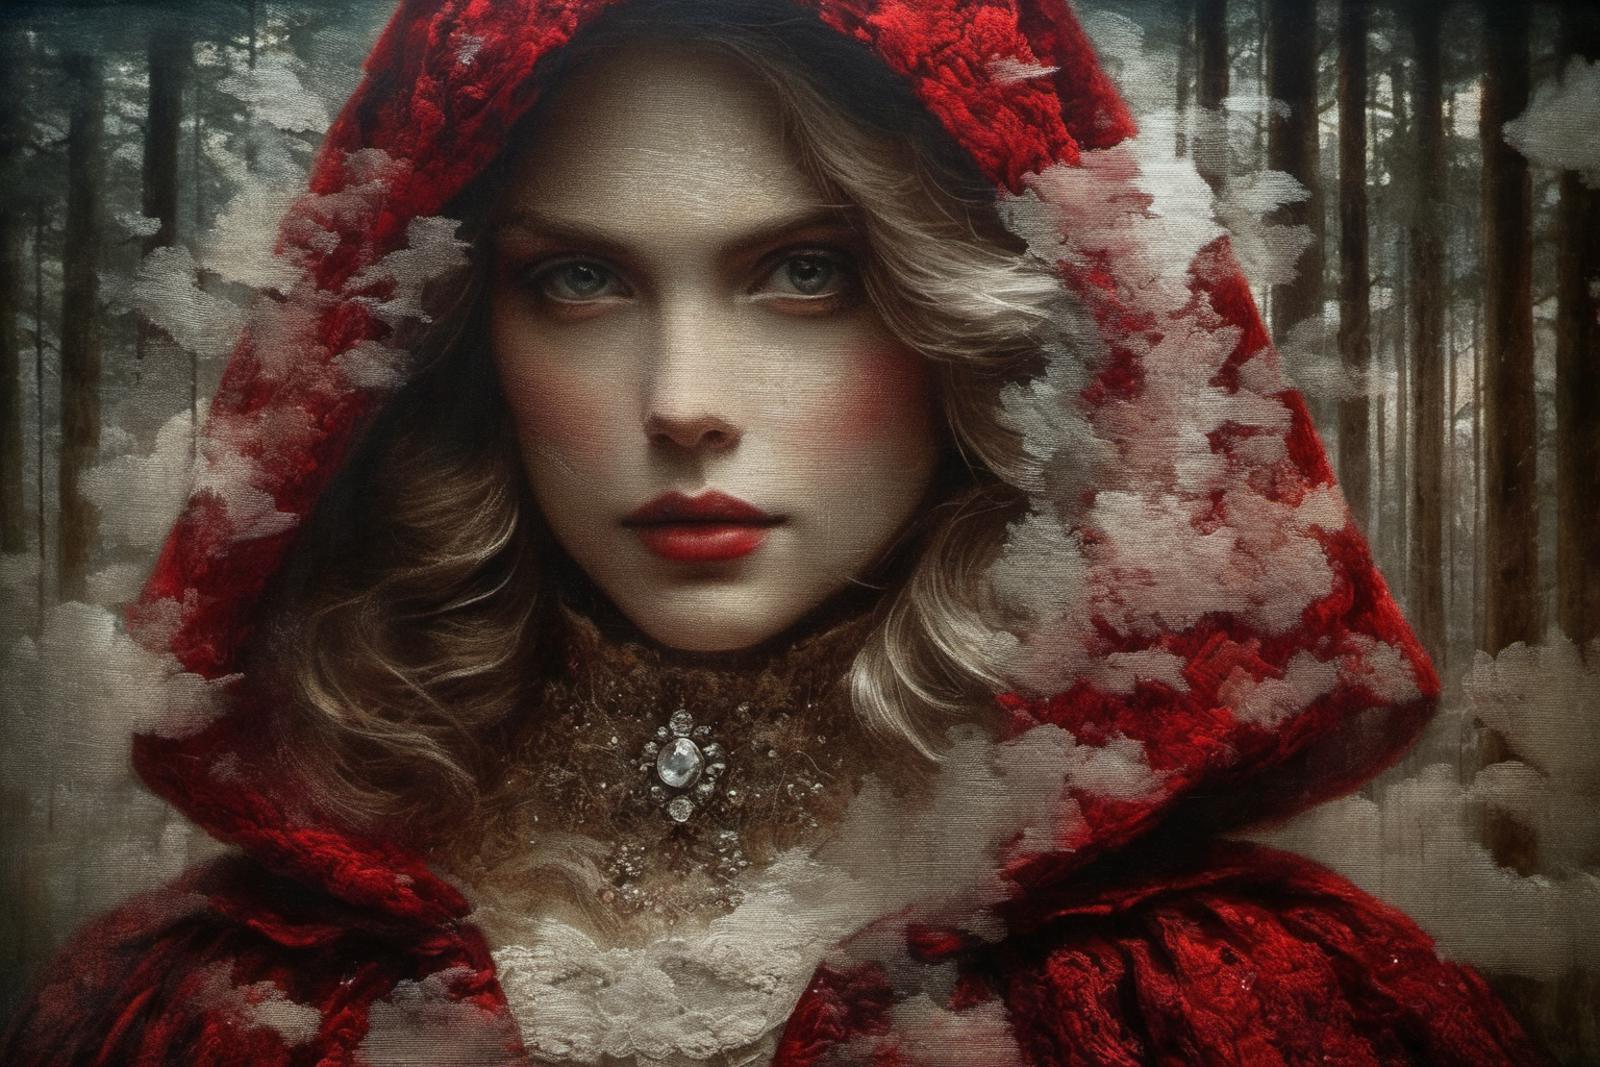 Artistic Portrait of a Lady in a Red Hooded Coat with Snowflakes